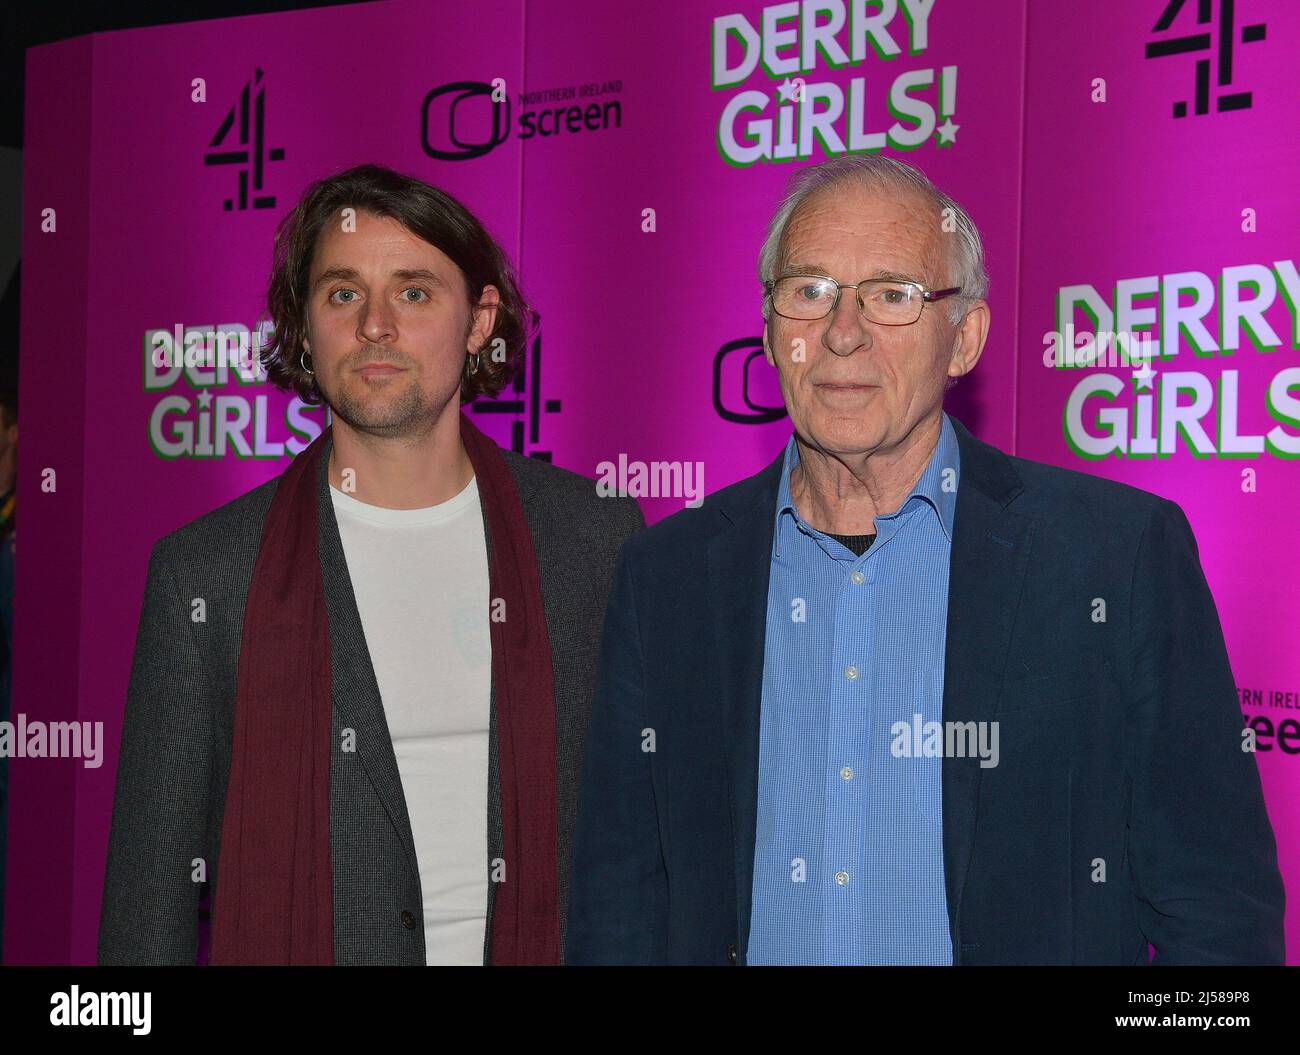 Art Campion (Father Peter) and Ian McElhinney (Granda Joe) at the premiere of Derry Girls Season 3 in Derry, Londonderry, Northern Ireland, 7 April 2022. ©George Sweeney / Alamy Stock Photo Stock Photo